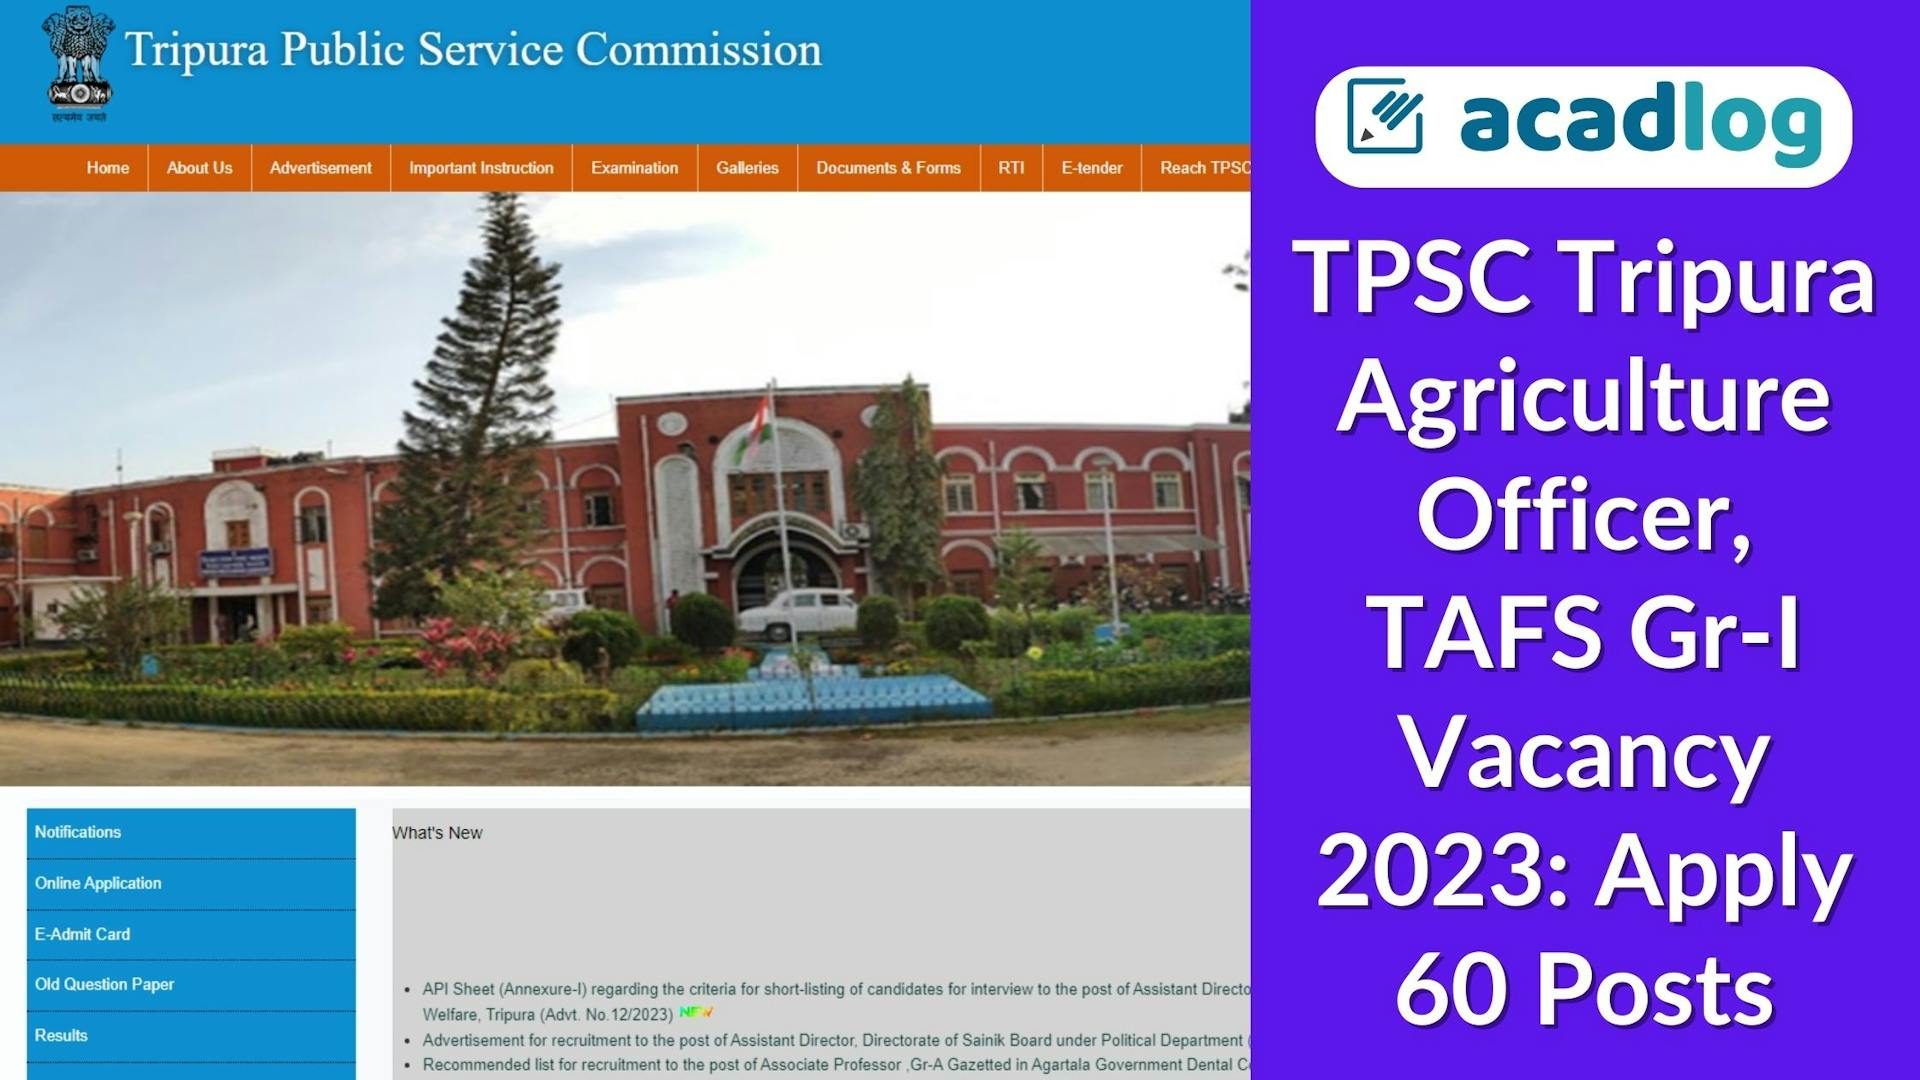 TPSC Tripura Agriculture Officer, TAFS Gr-I Vacancy 2023: Apply 60 Posts